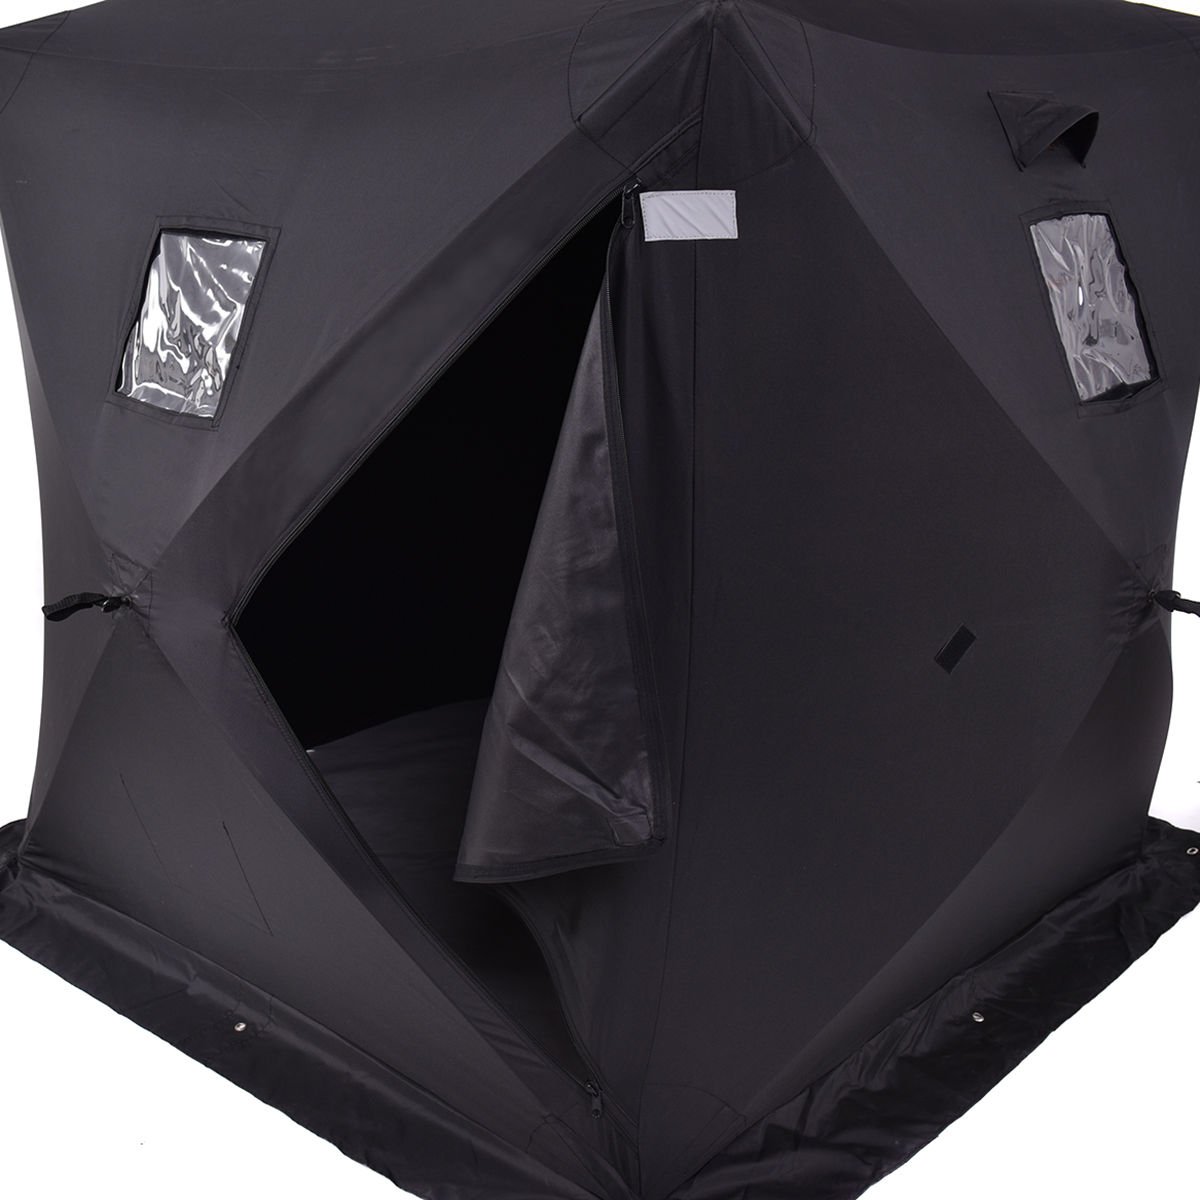 2-Person Outdoor Portable Ice Fishing Shelter Tent, Black